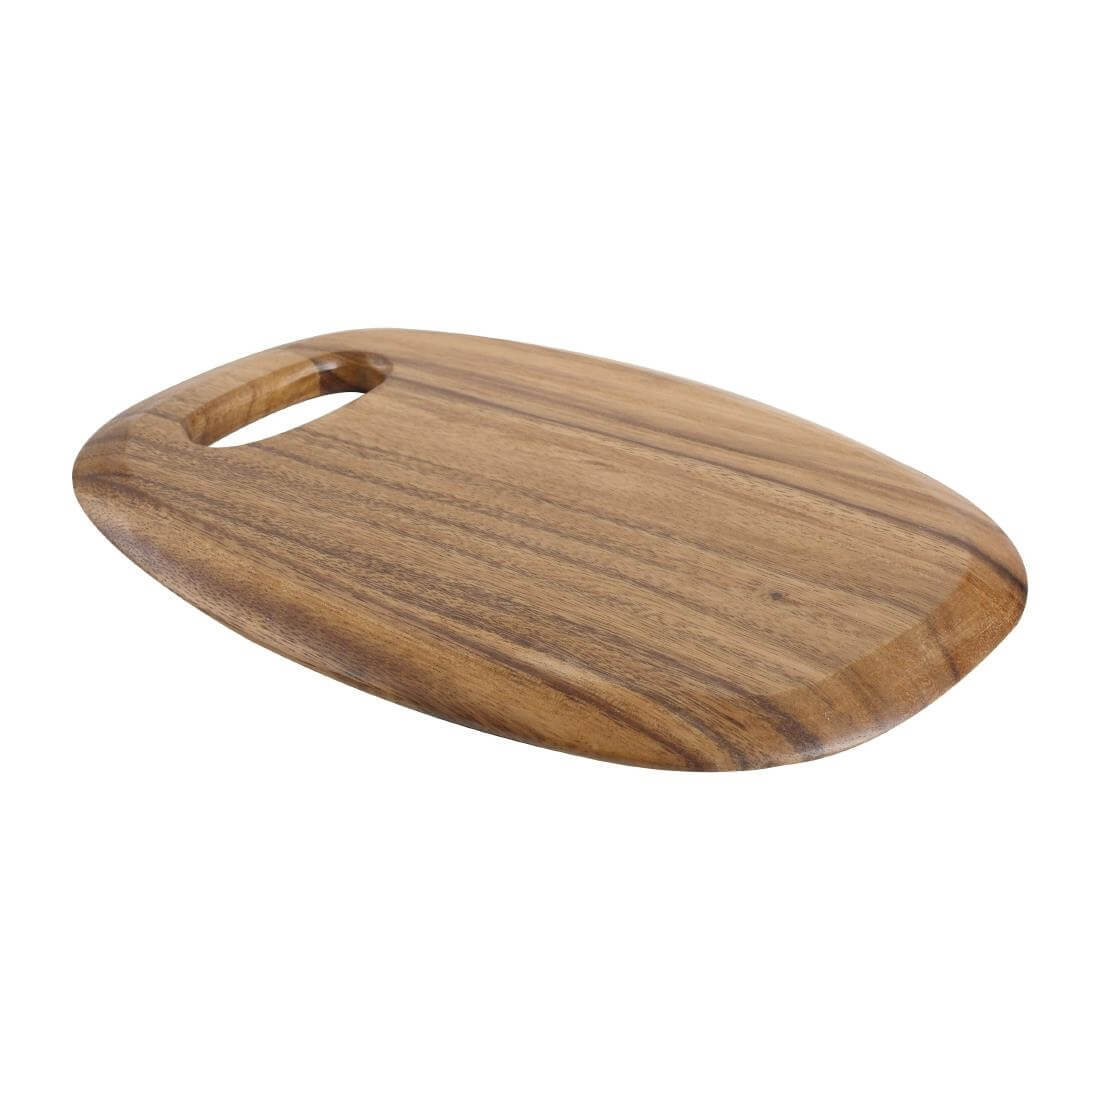 Small Rounded Acacia Presentation Board with Handle